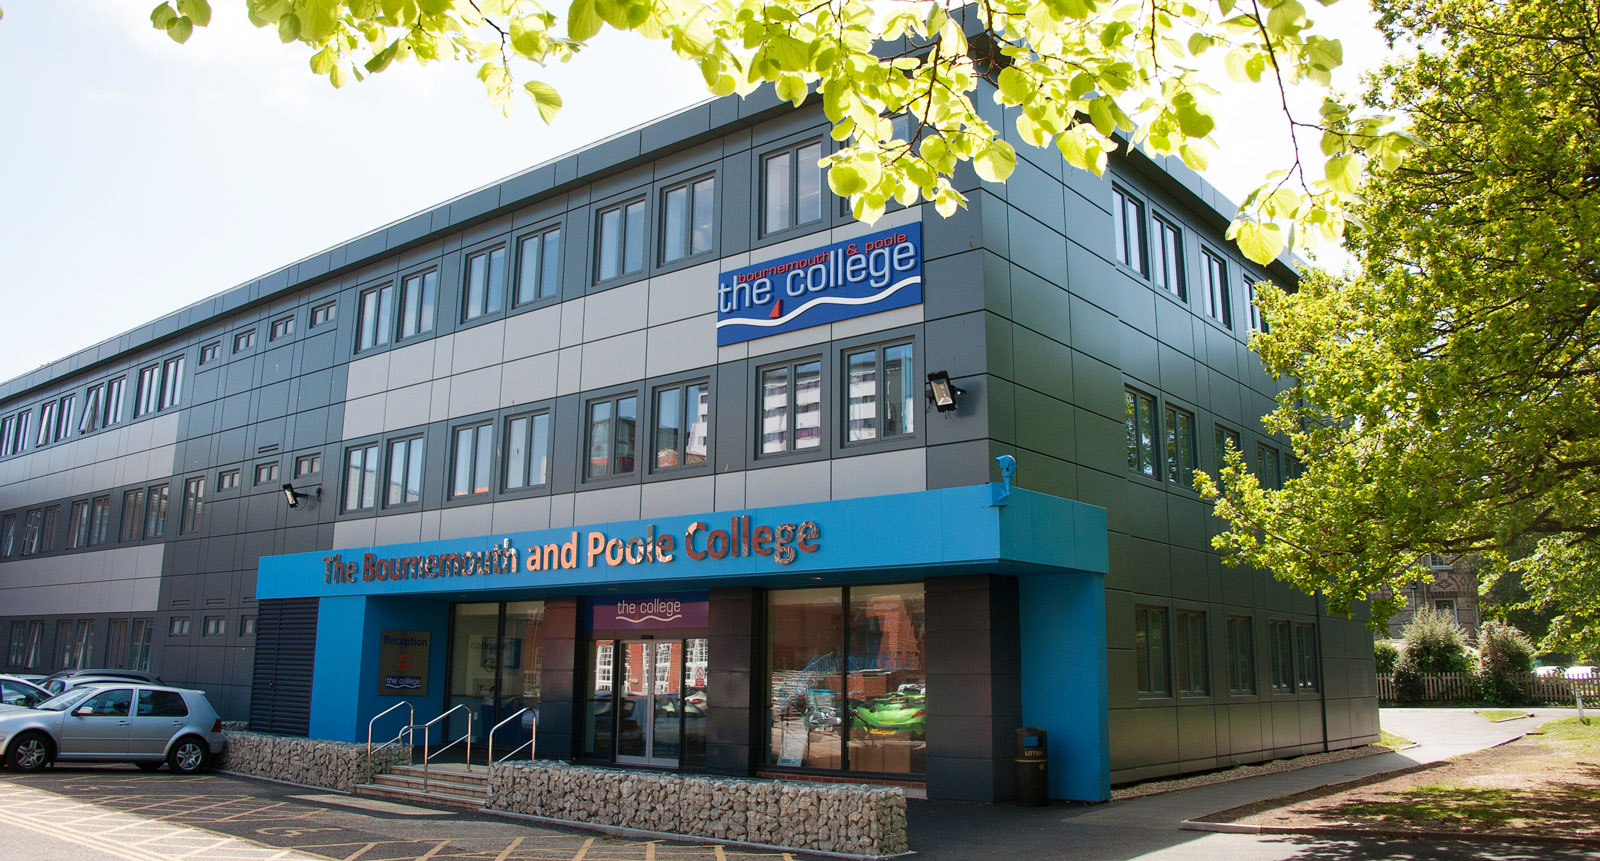 The Bournemouth and Poole College